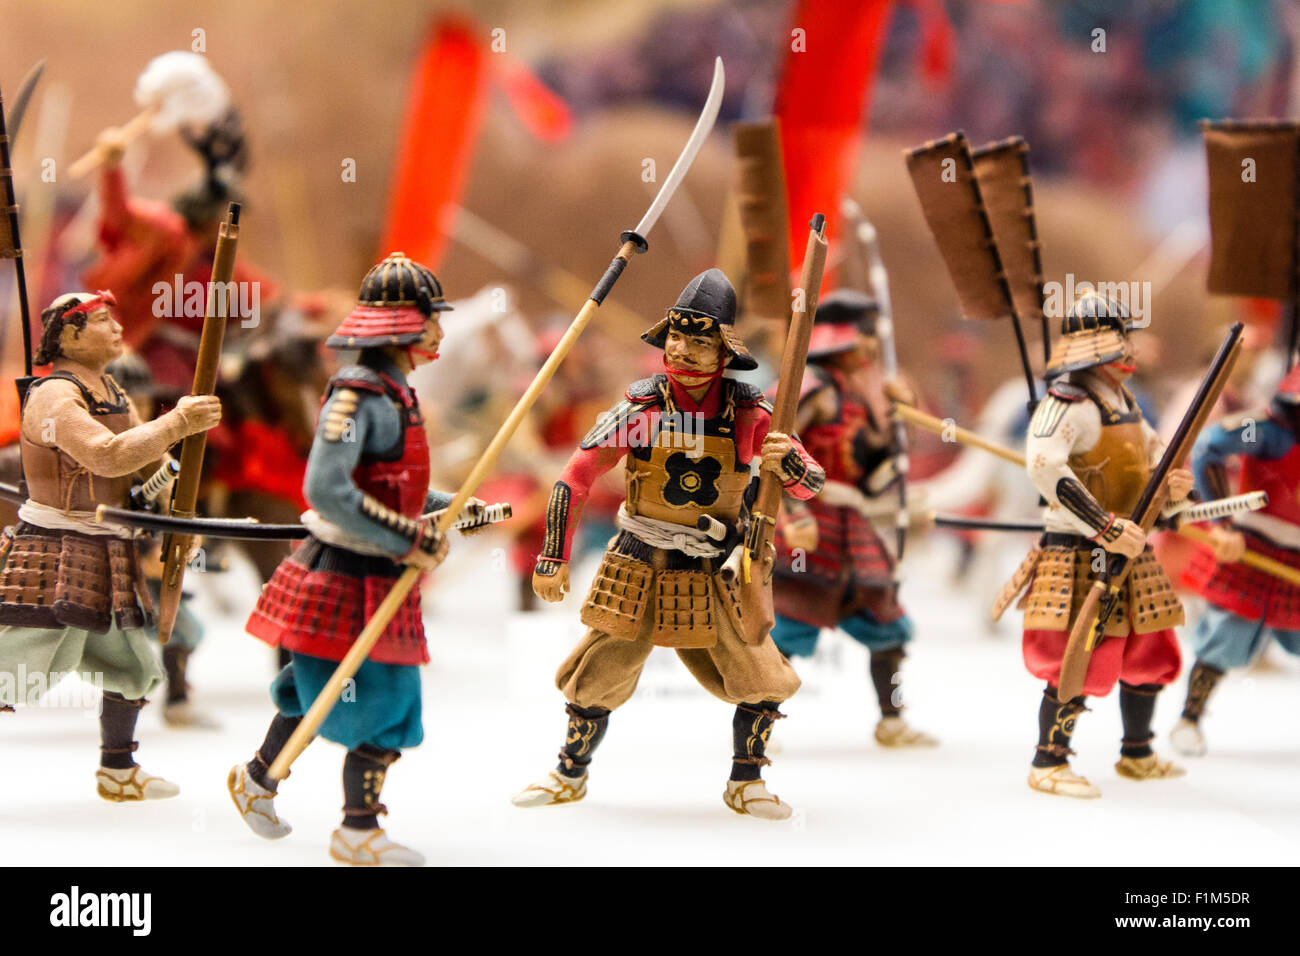 Osaka Castle Keep Museum Model Of Battles Between Two Japanese Army From The Warring States Period Painted Figures Set On Plain White Background Stock Photo Alamy